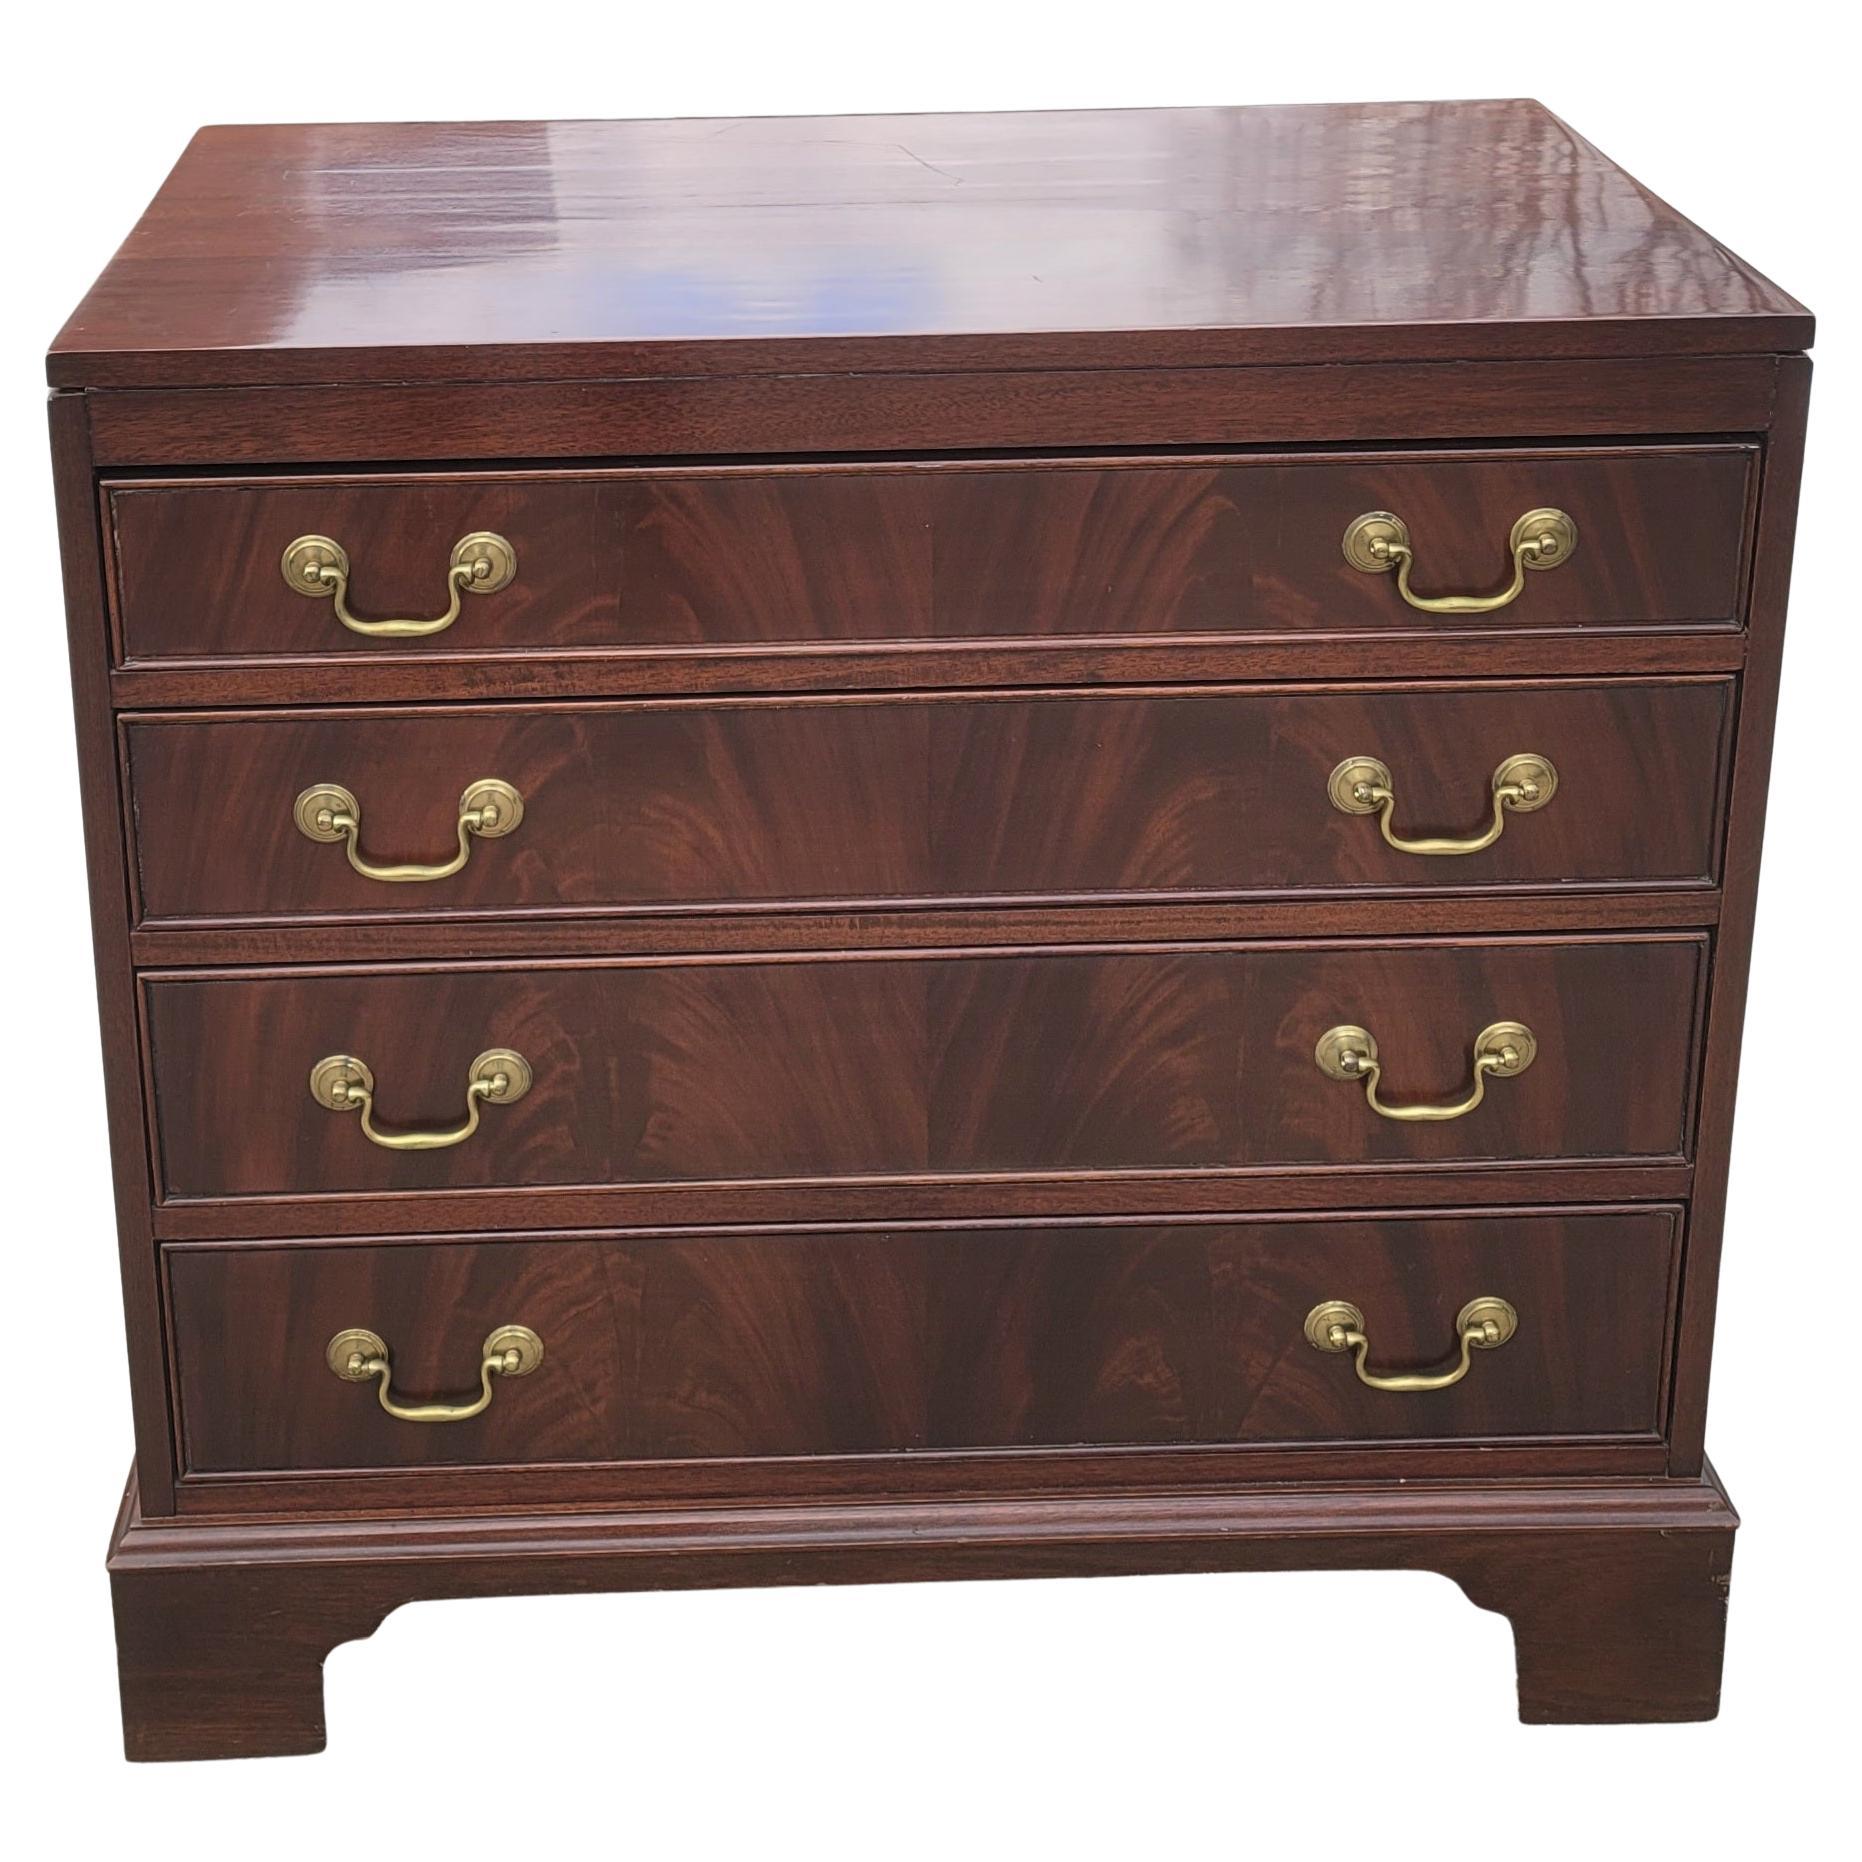 Jasper Cabinet Chippendale Flame Mahogany Commode Chest of Drawers 2